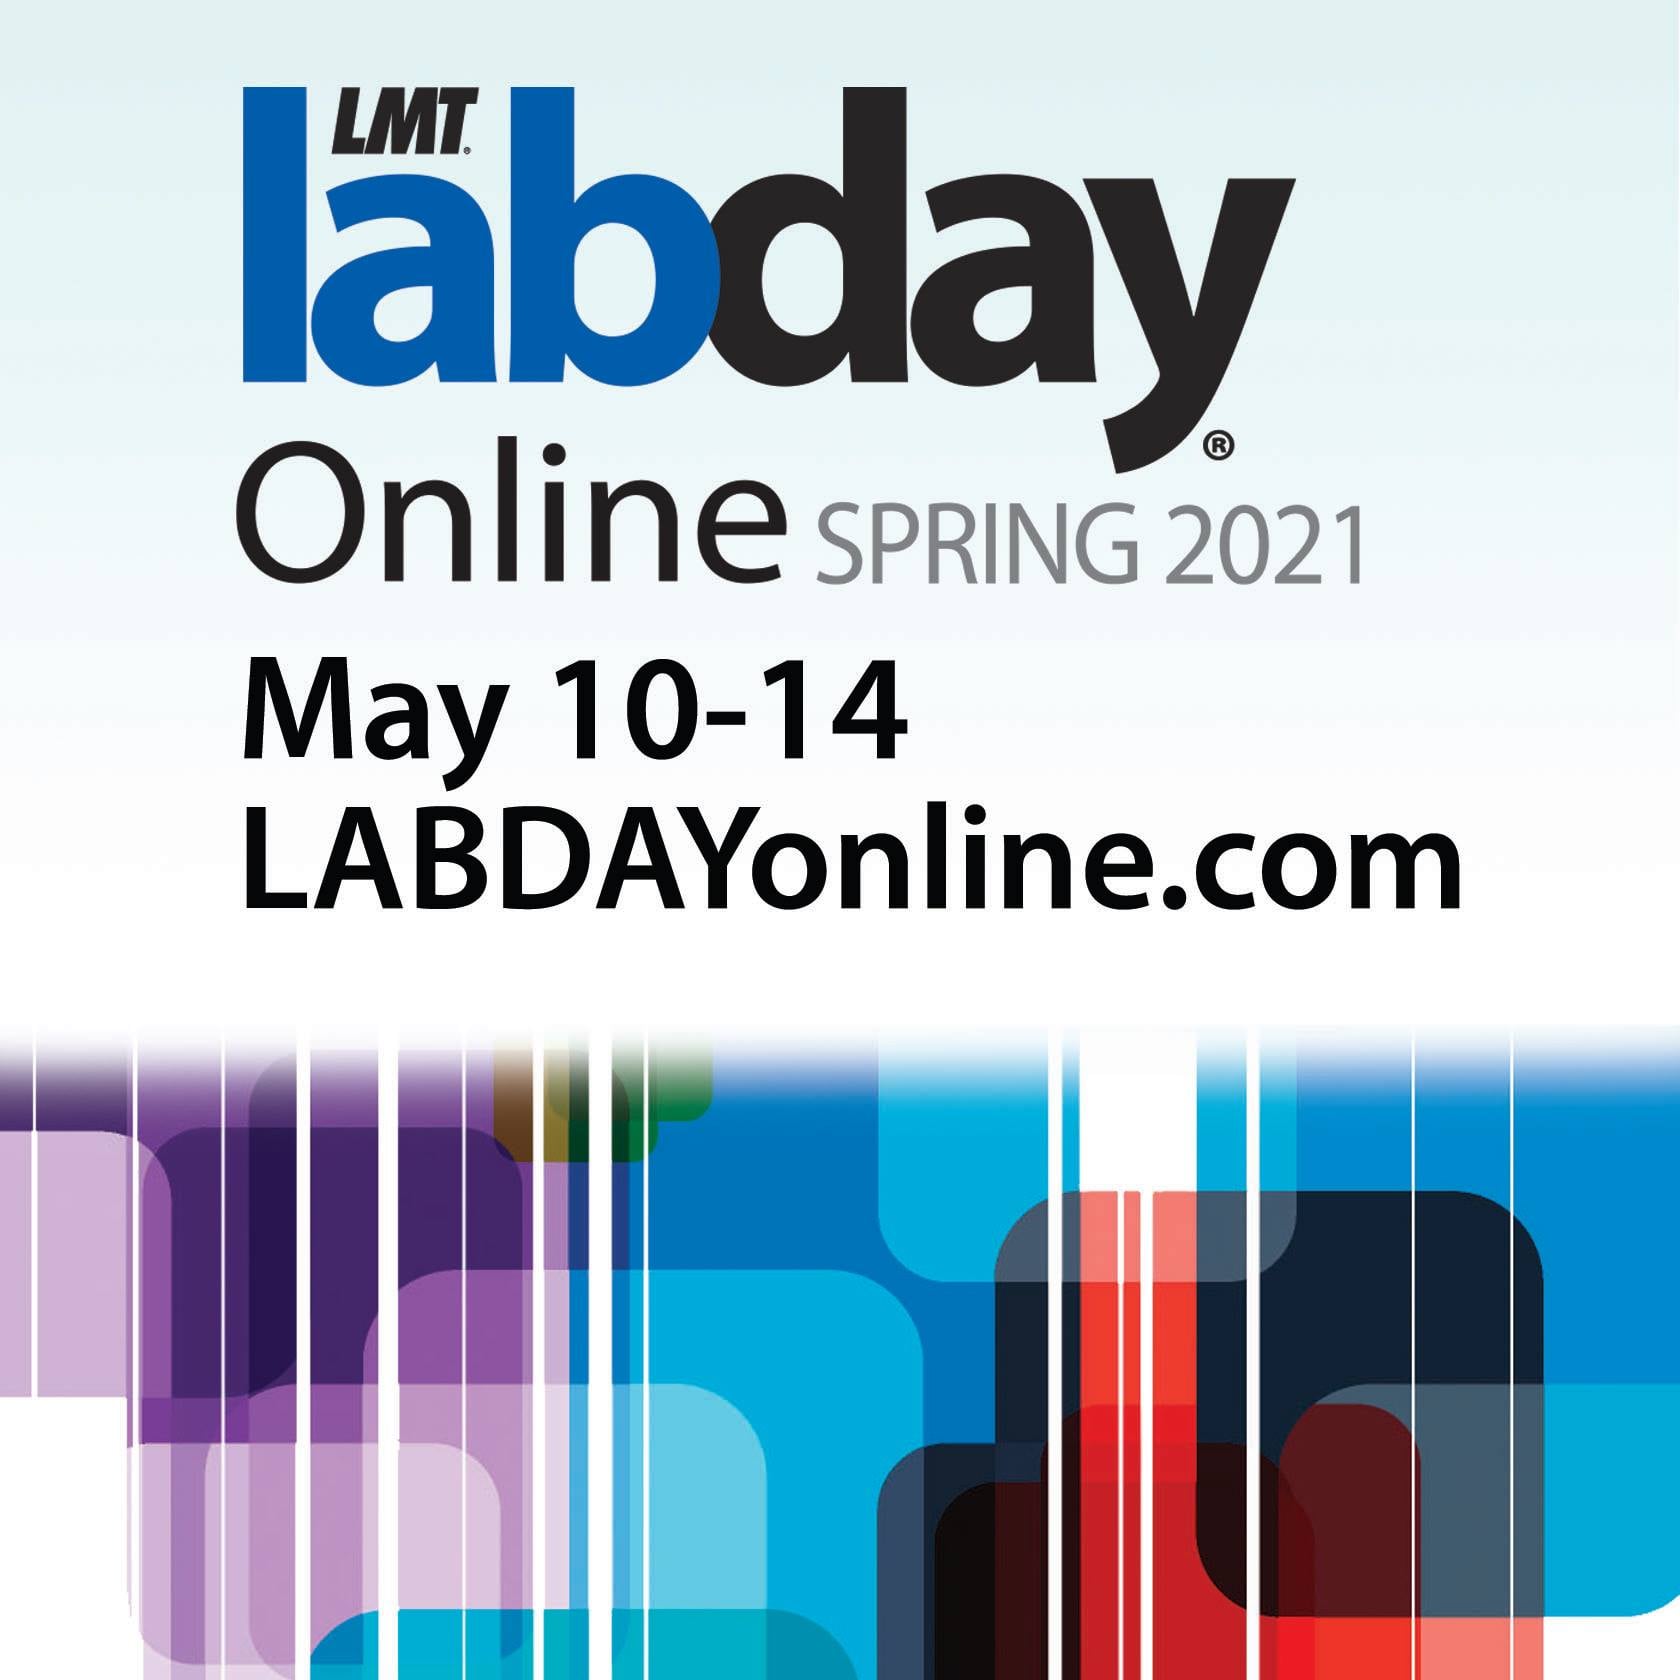 XTCERA at LAB DAY Online Spring 2021